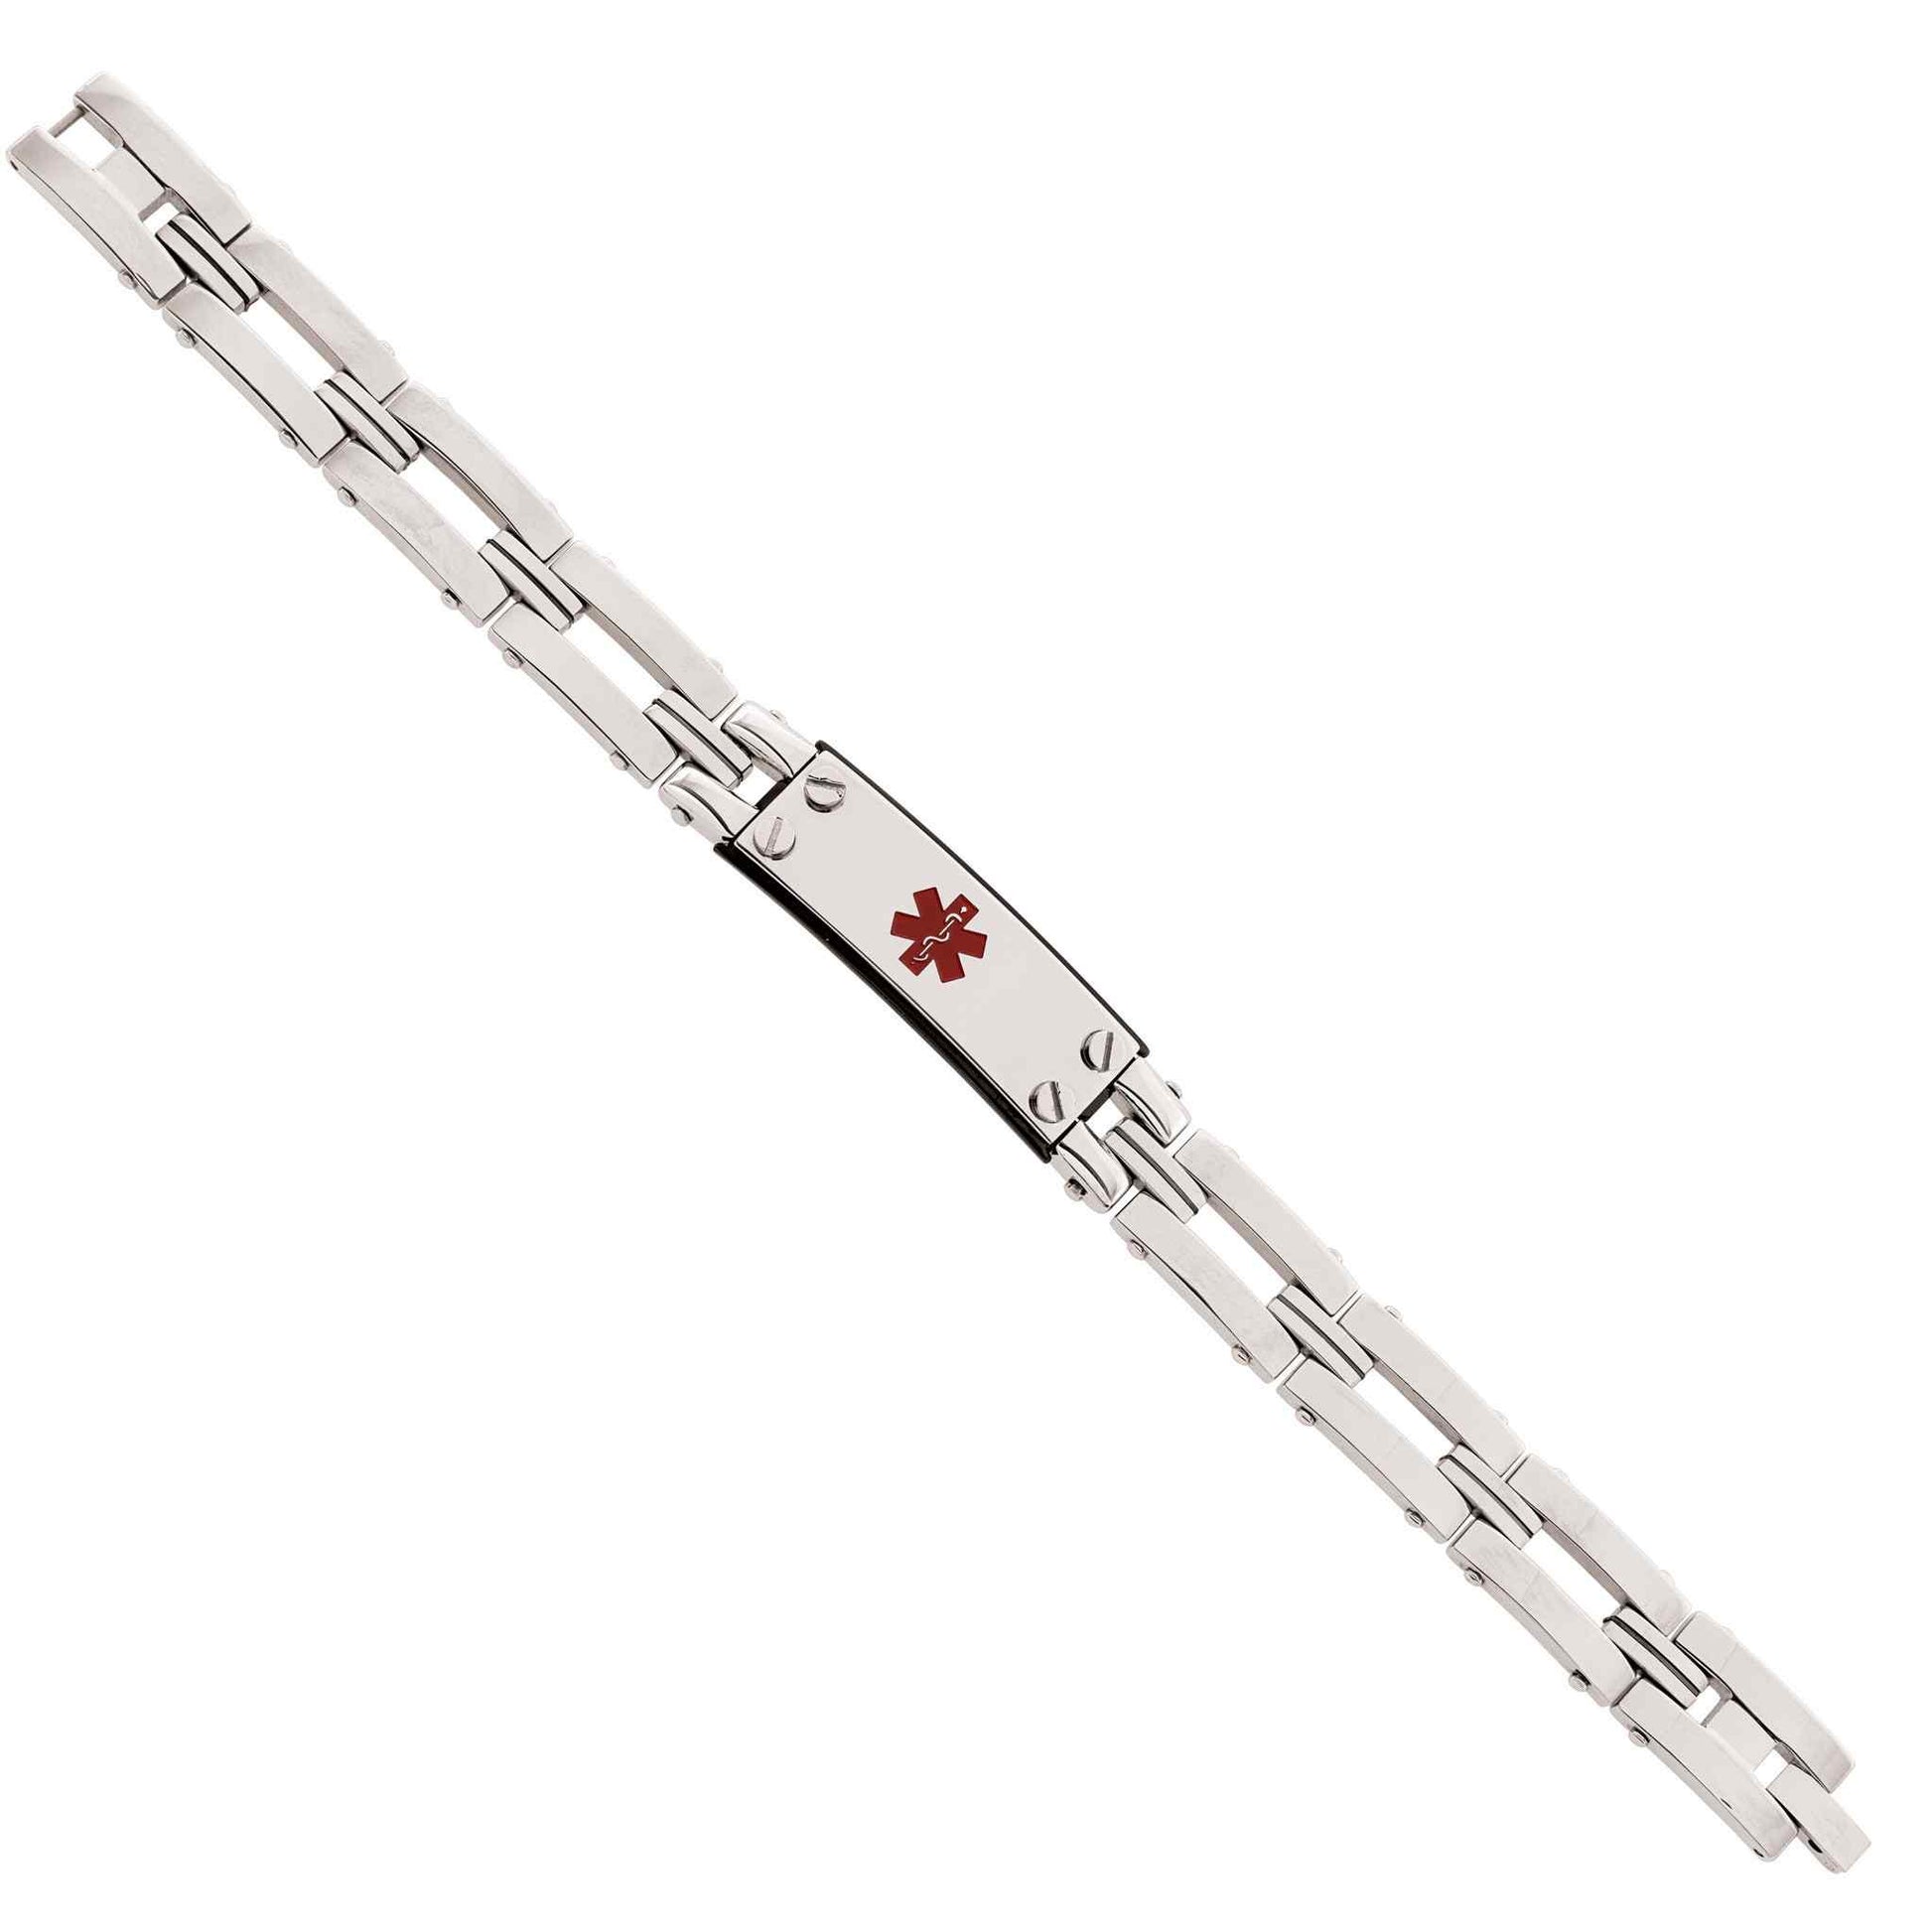 A stainless steel 8 3/4" adjustable medical id bracelet displayed on a neutral white background.